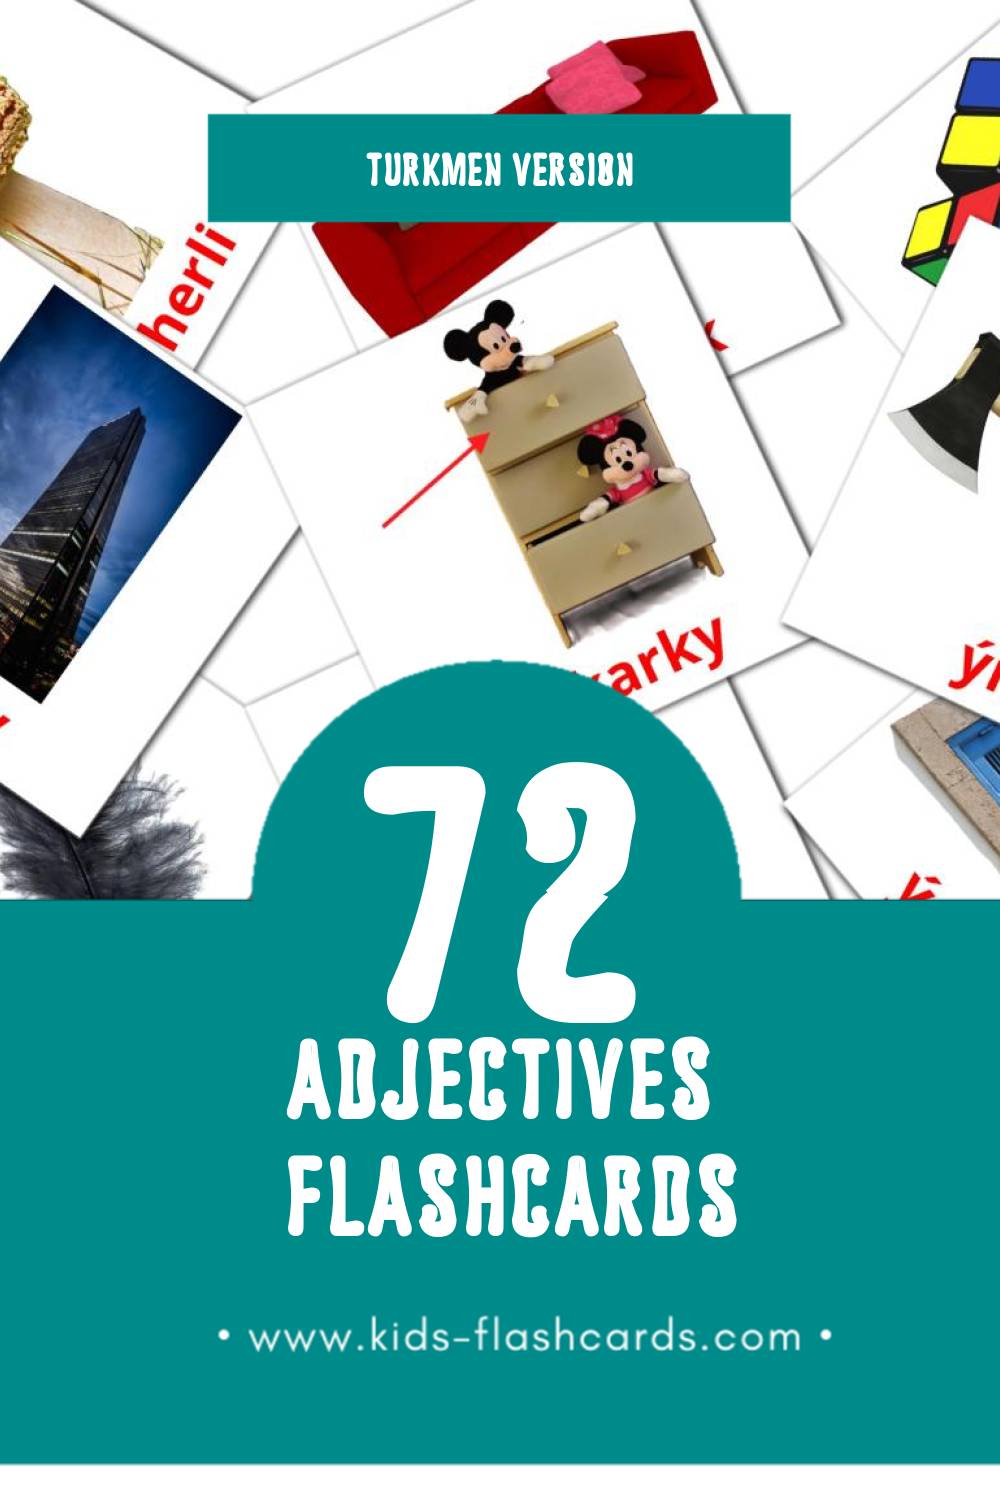 Visual Sypatlar Flashcards for Toddlers (72 cards in Turkmen)